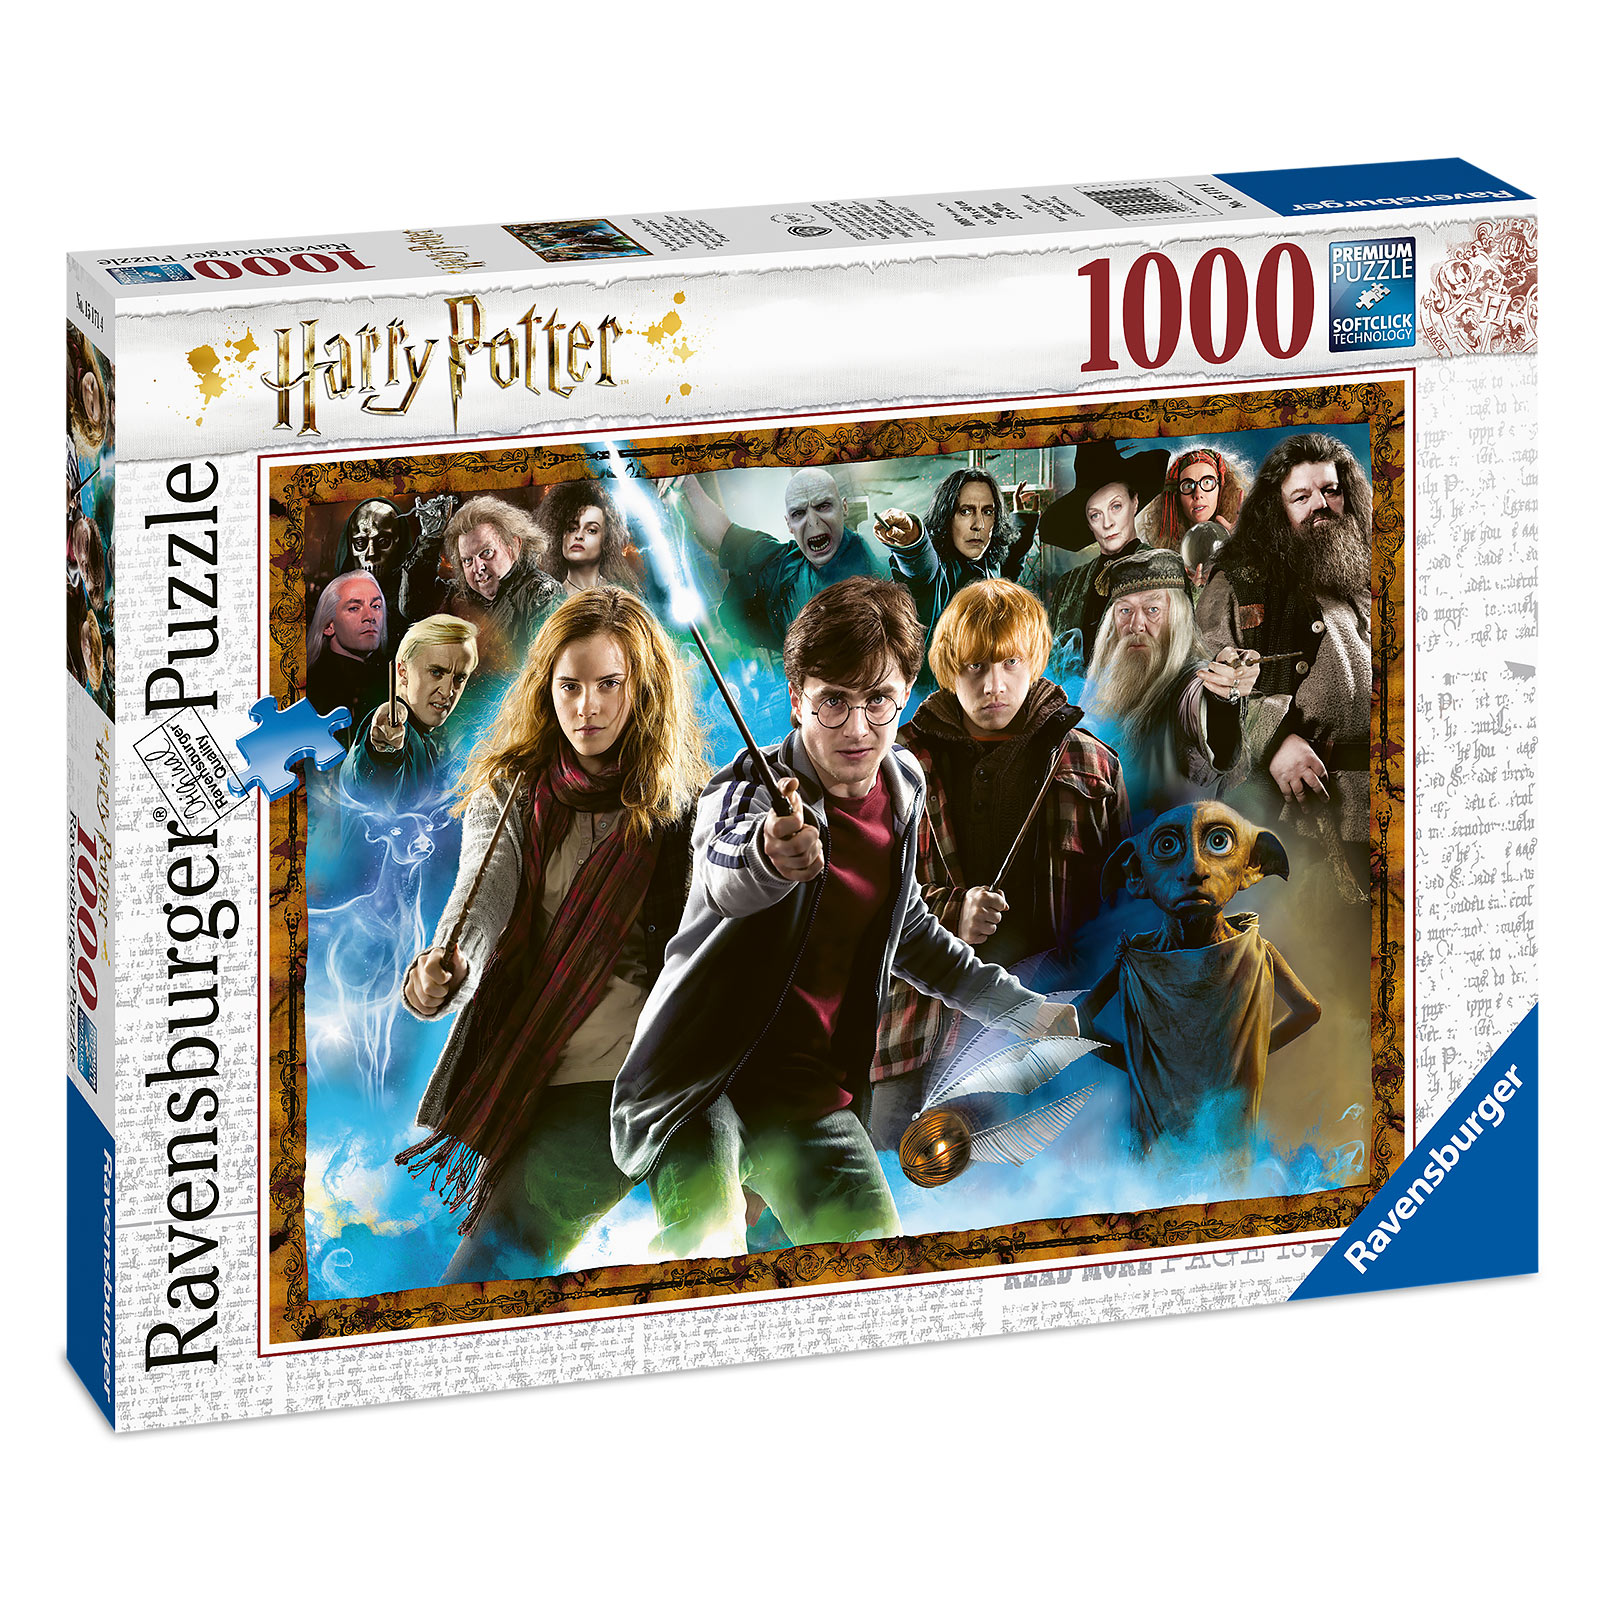 Harry Potter - Charakter Collage Puzzle